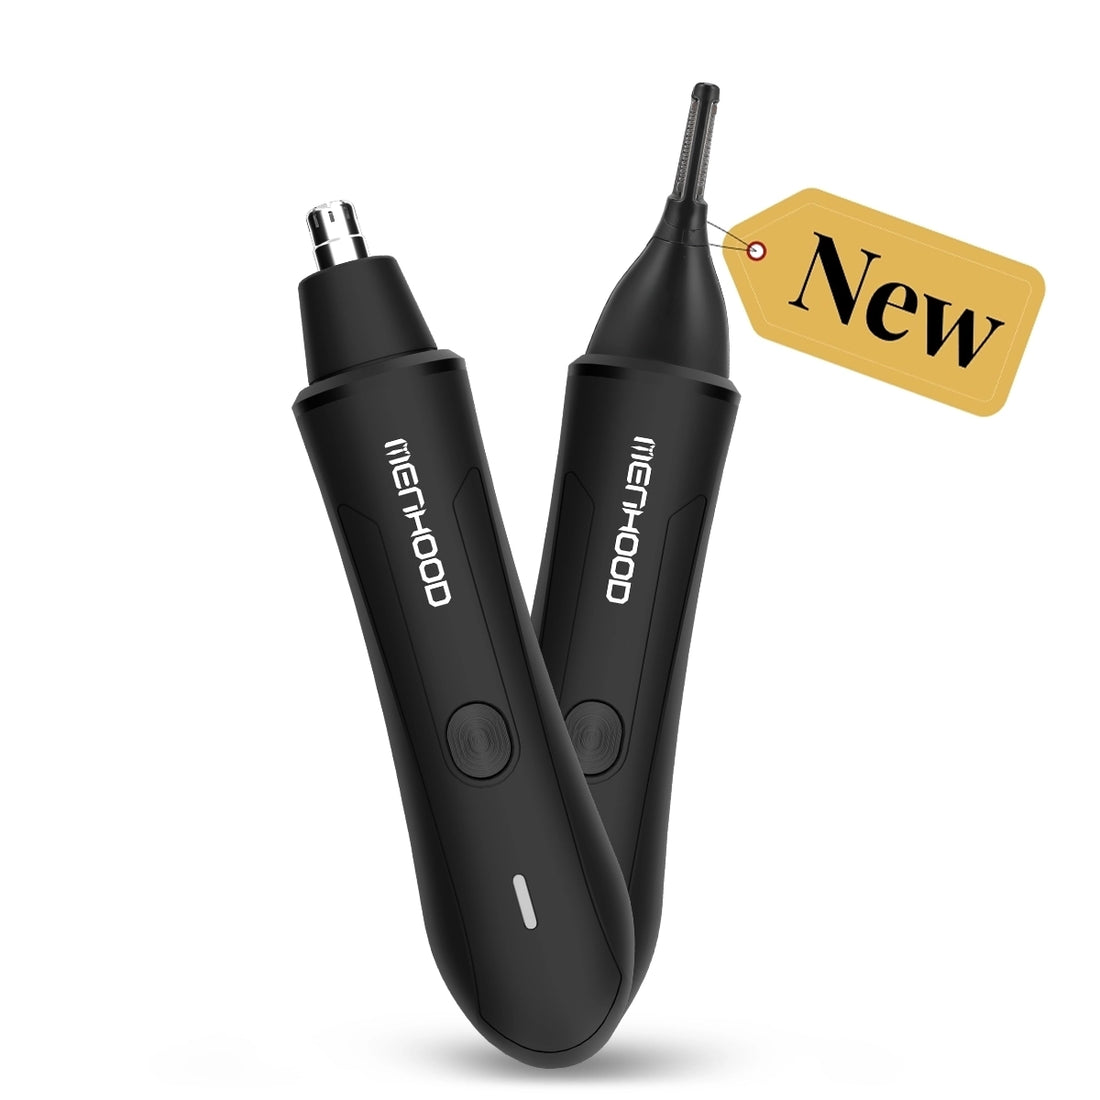 Menhood Nosar - Nose and Ear Hair Trimmer